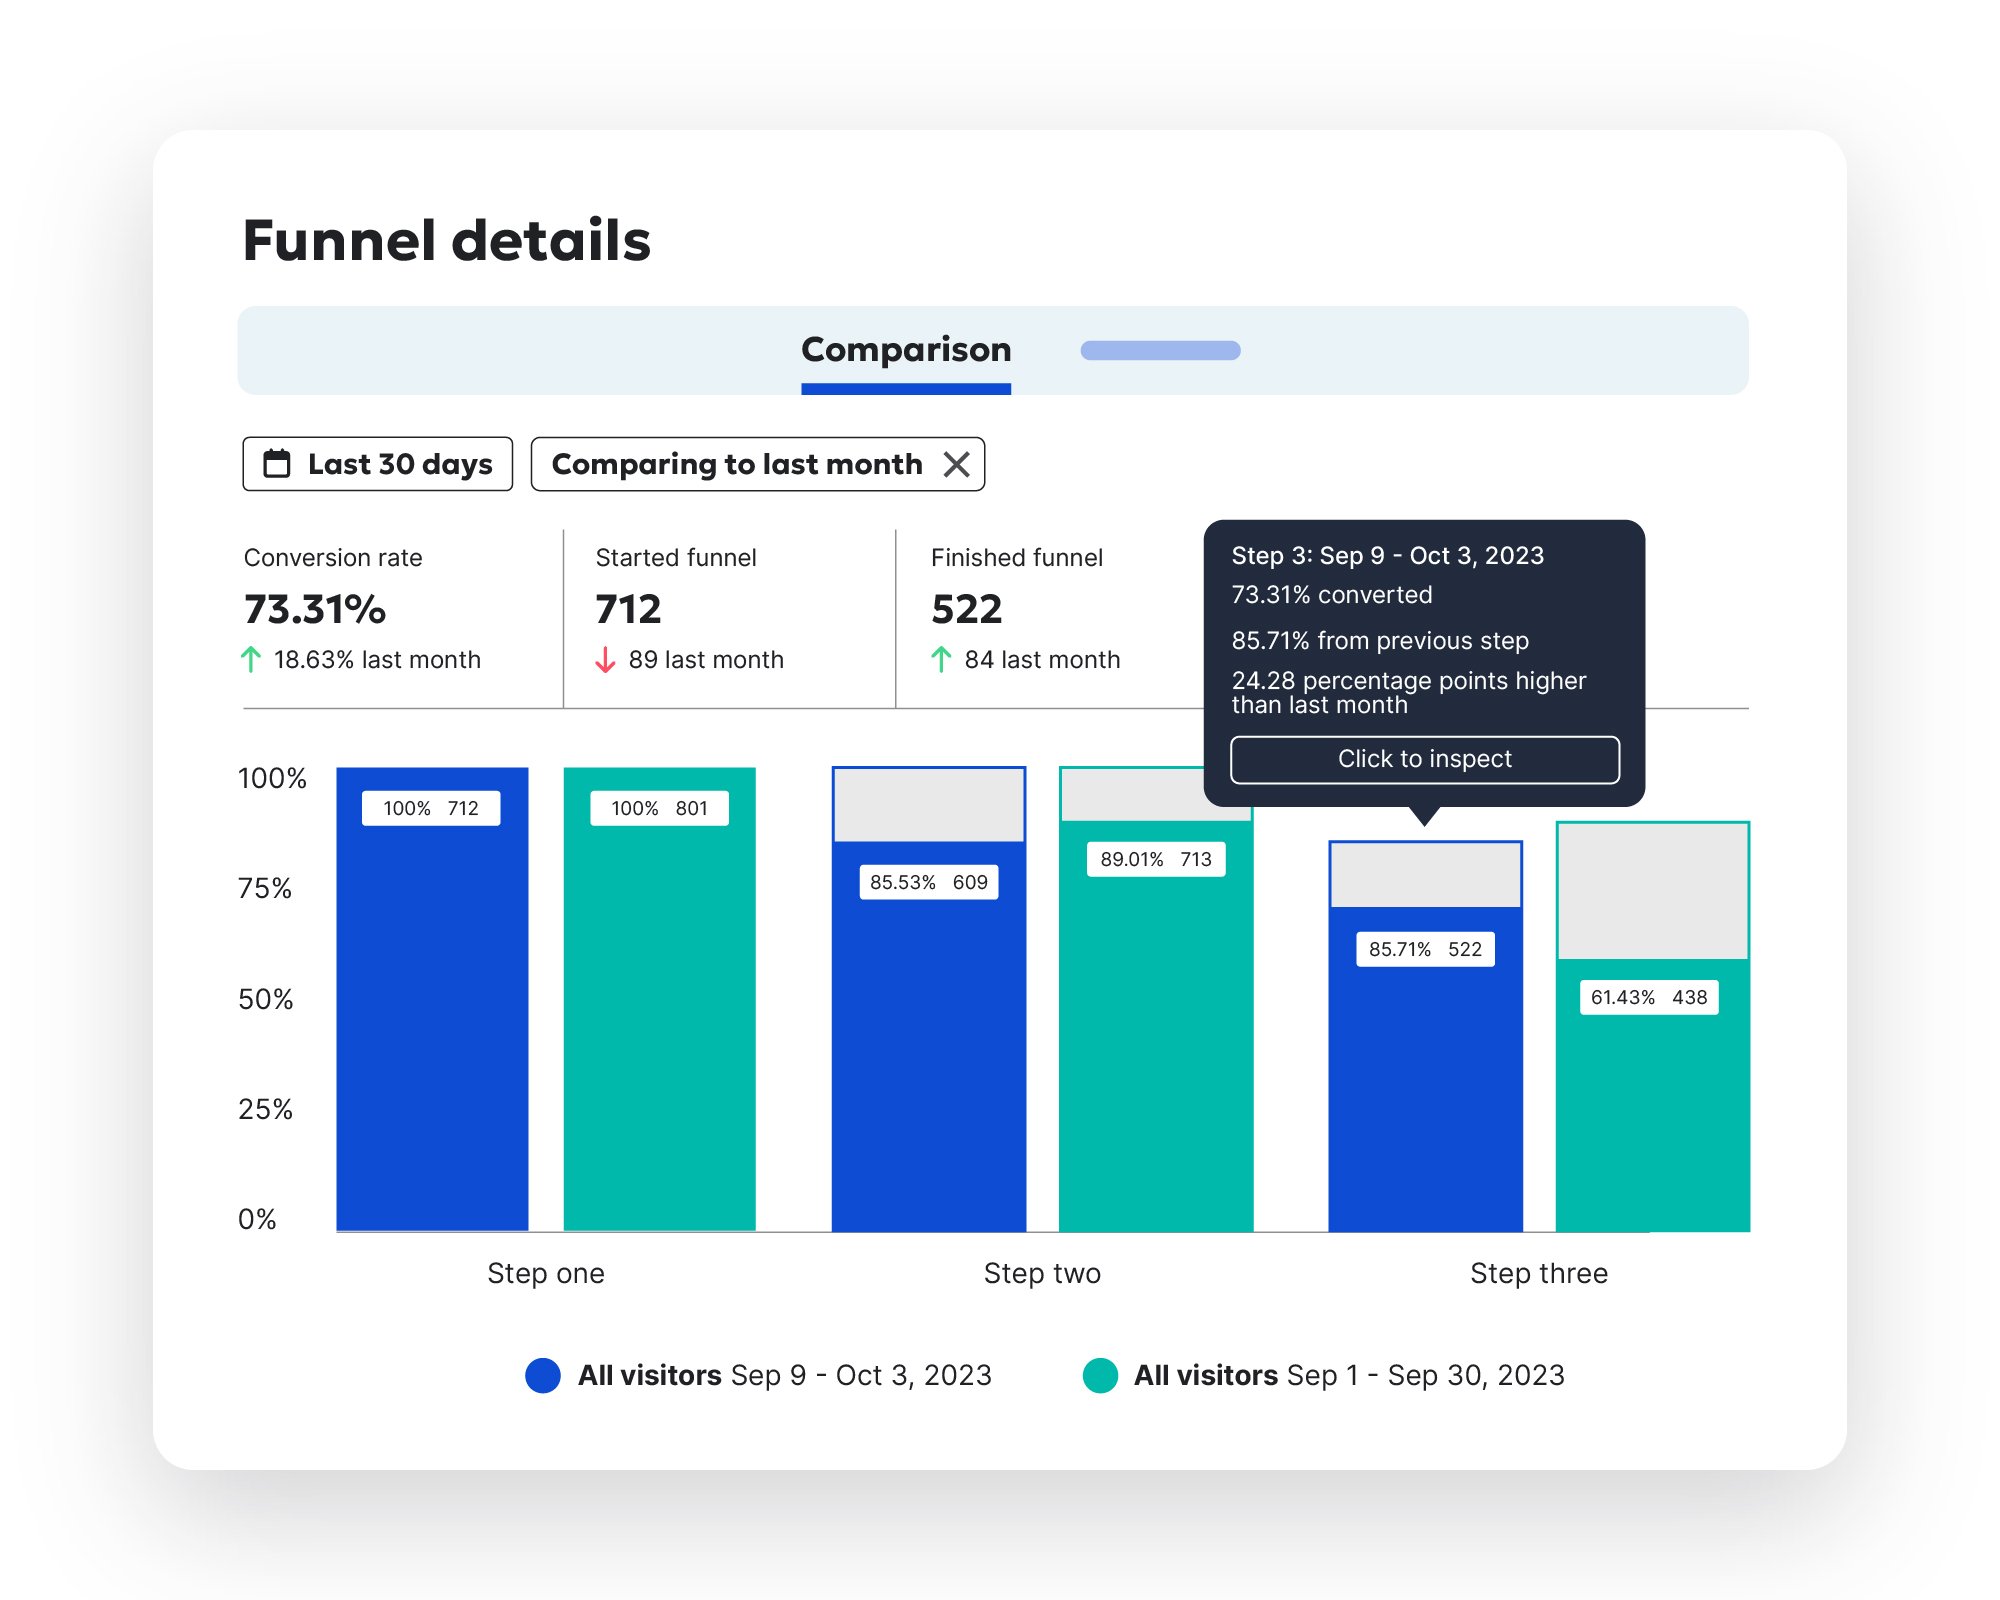 Funnel Comparisons allows you to compare a funnel across different time periods